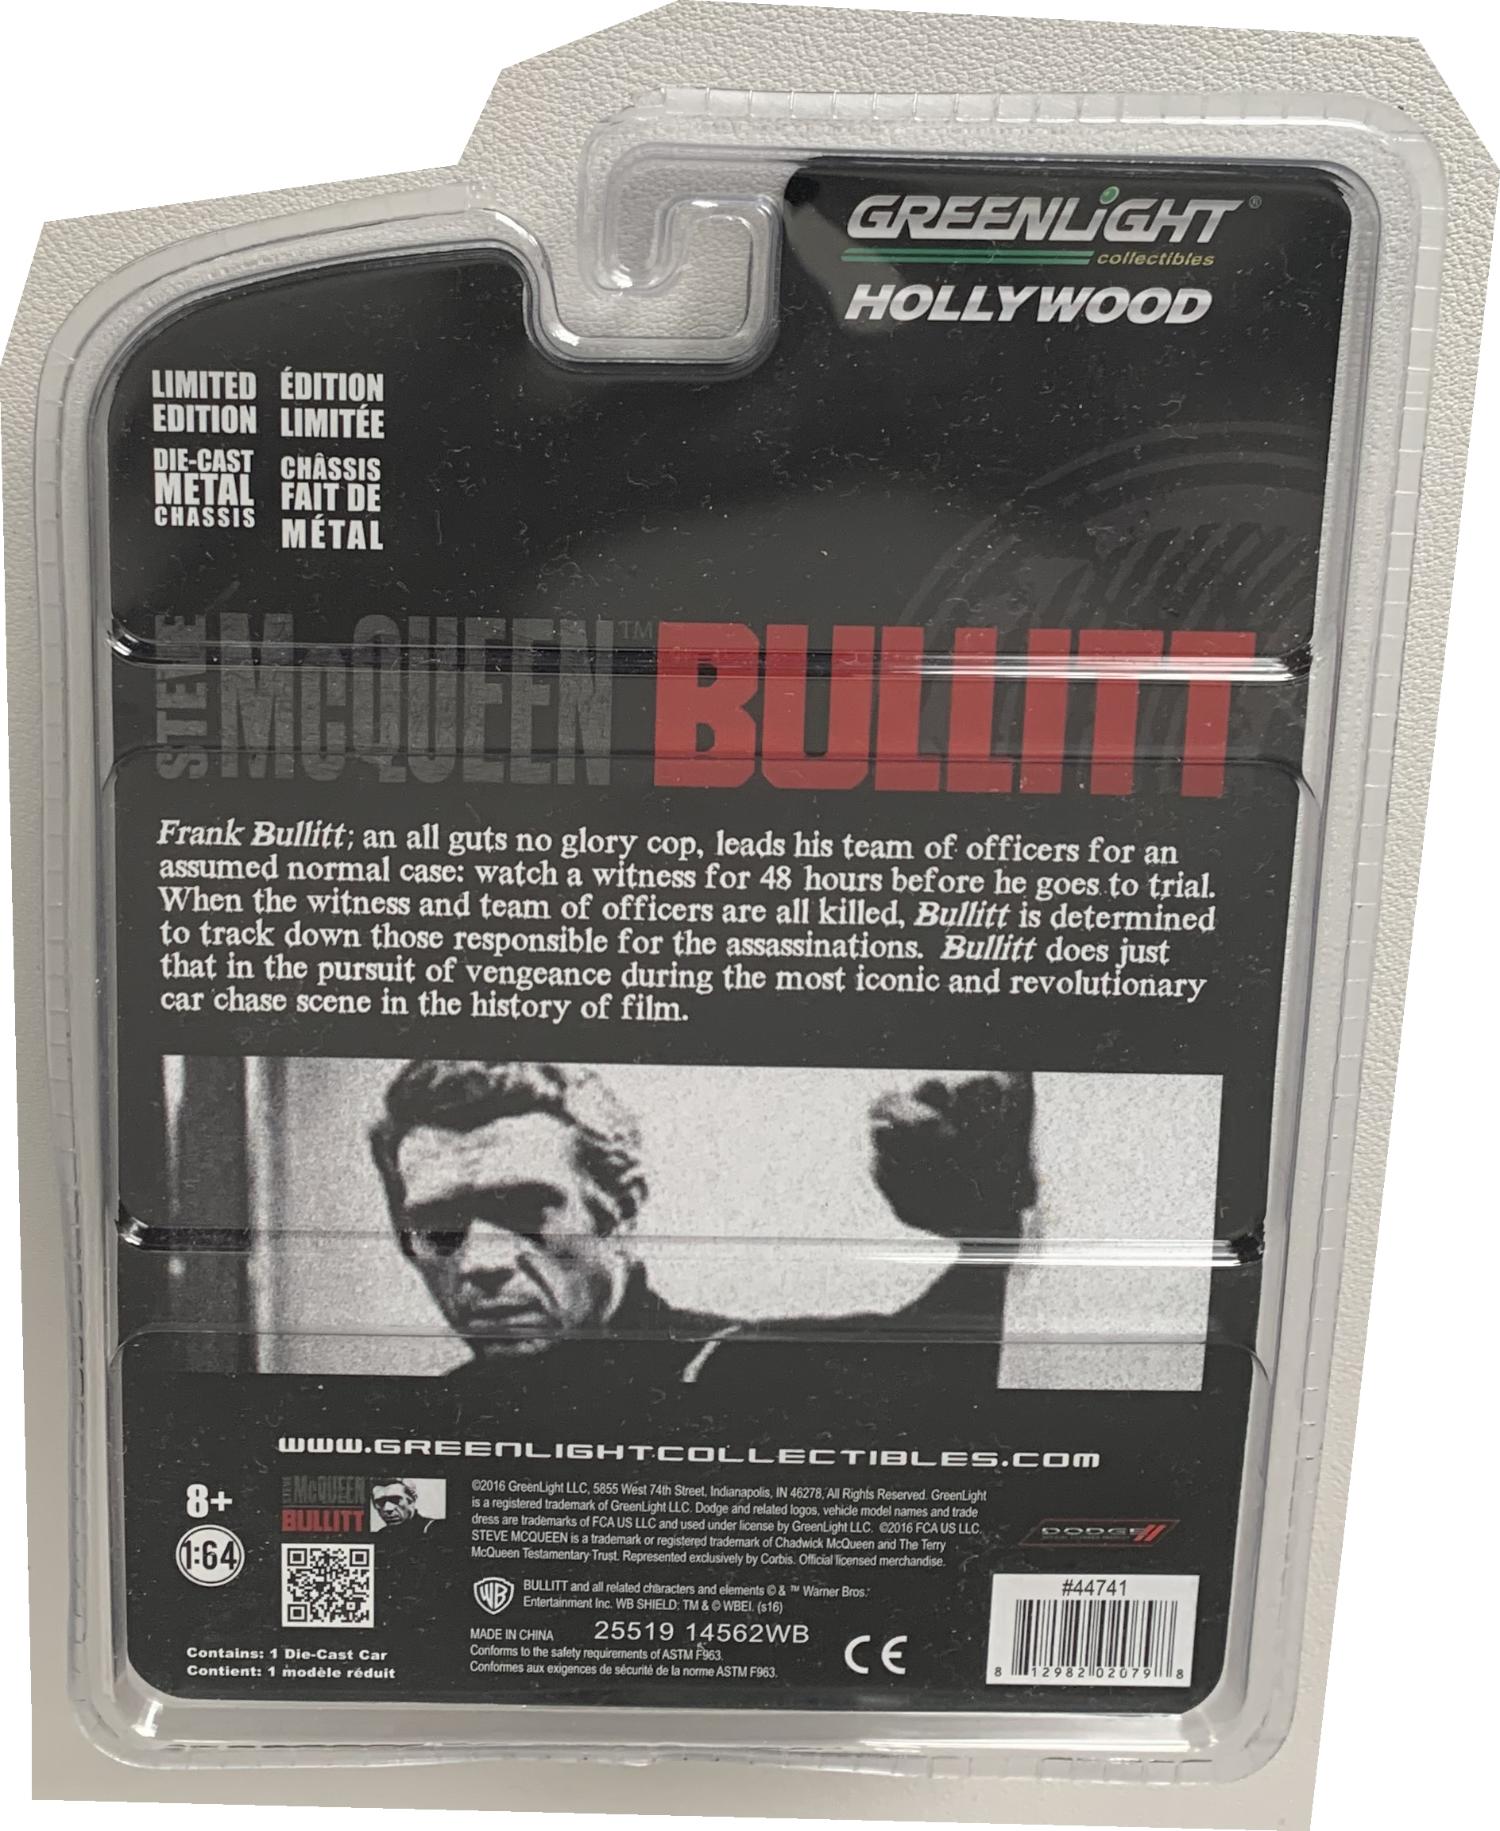 rom the Steve McQueen film Bullitt, 1968 Dodge Charger in black 1:64 scale model from Greenlight, limited edition